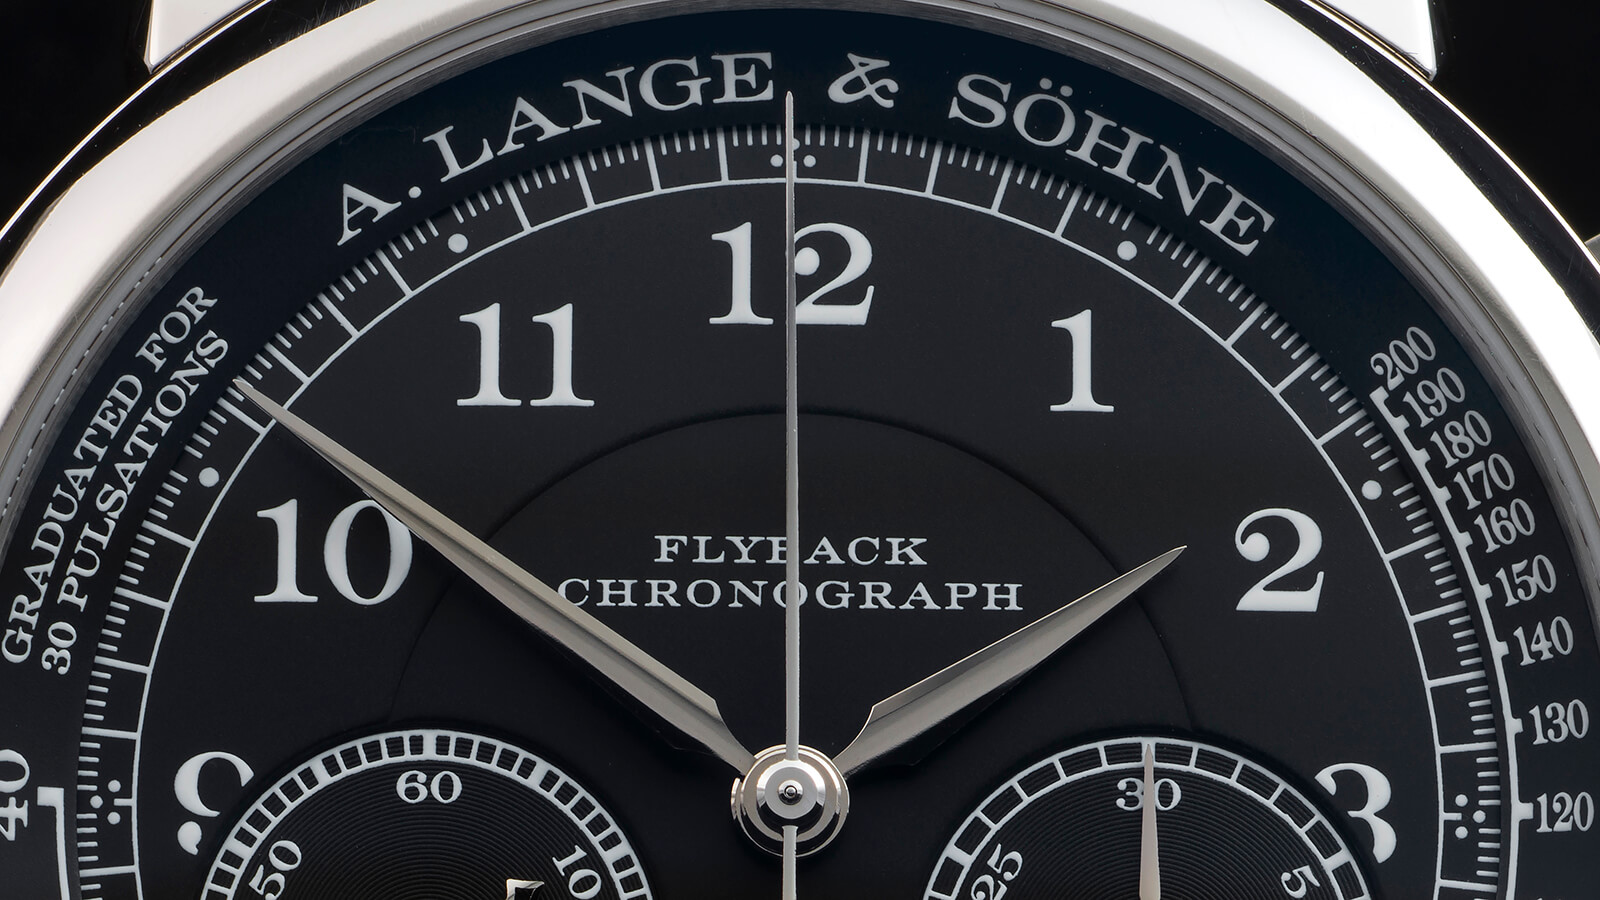 Layers in the darkness: dial detail, A. Lange & Söhne 1815 Chronograph